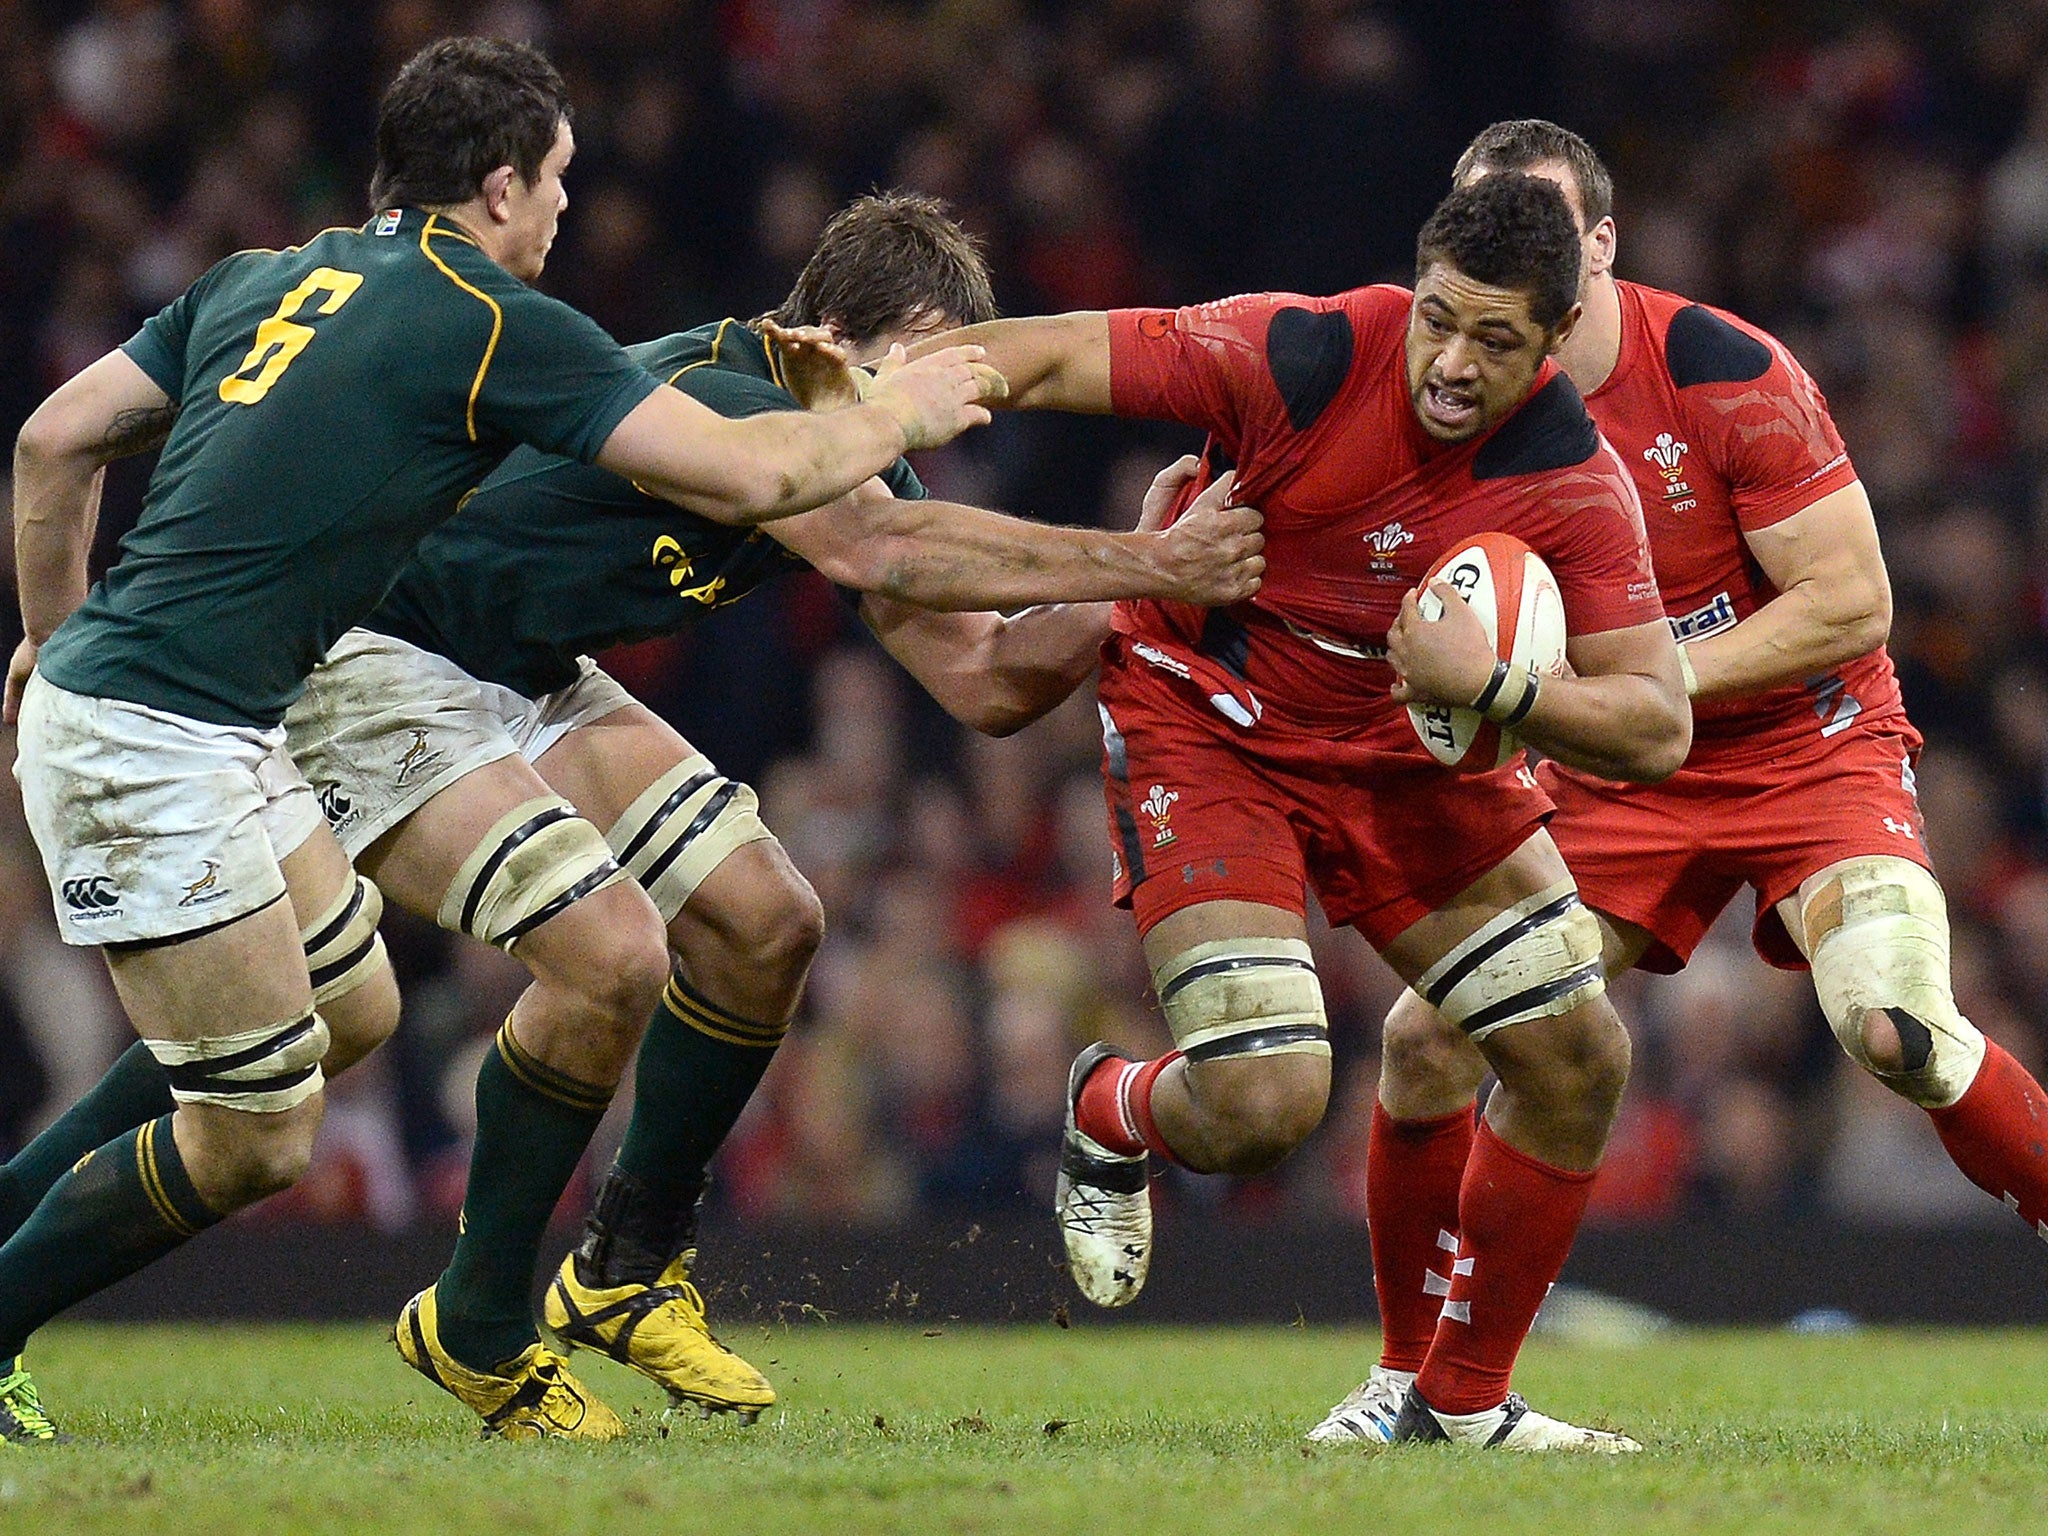 Wales Number Eight Toby Faletau attempts to break the tackle of the South African defence